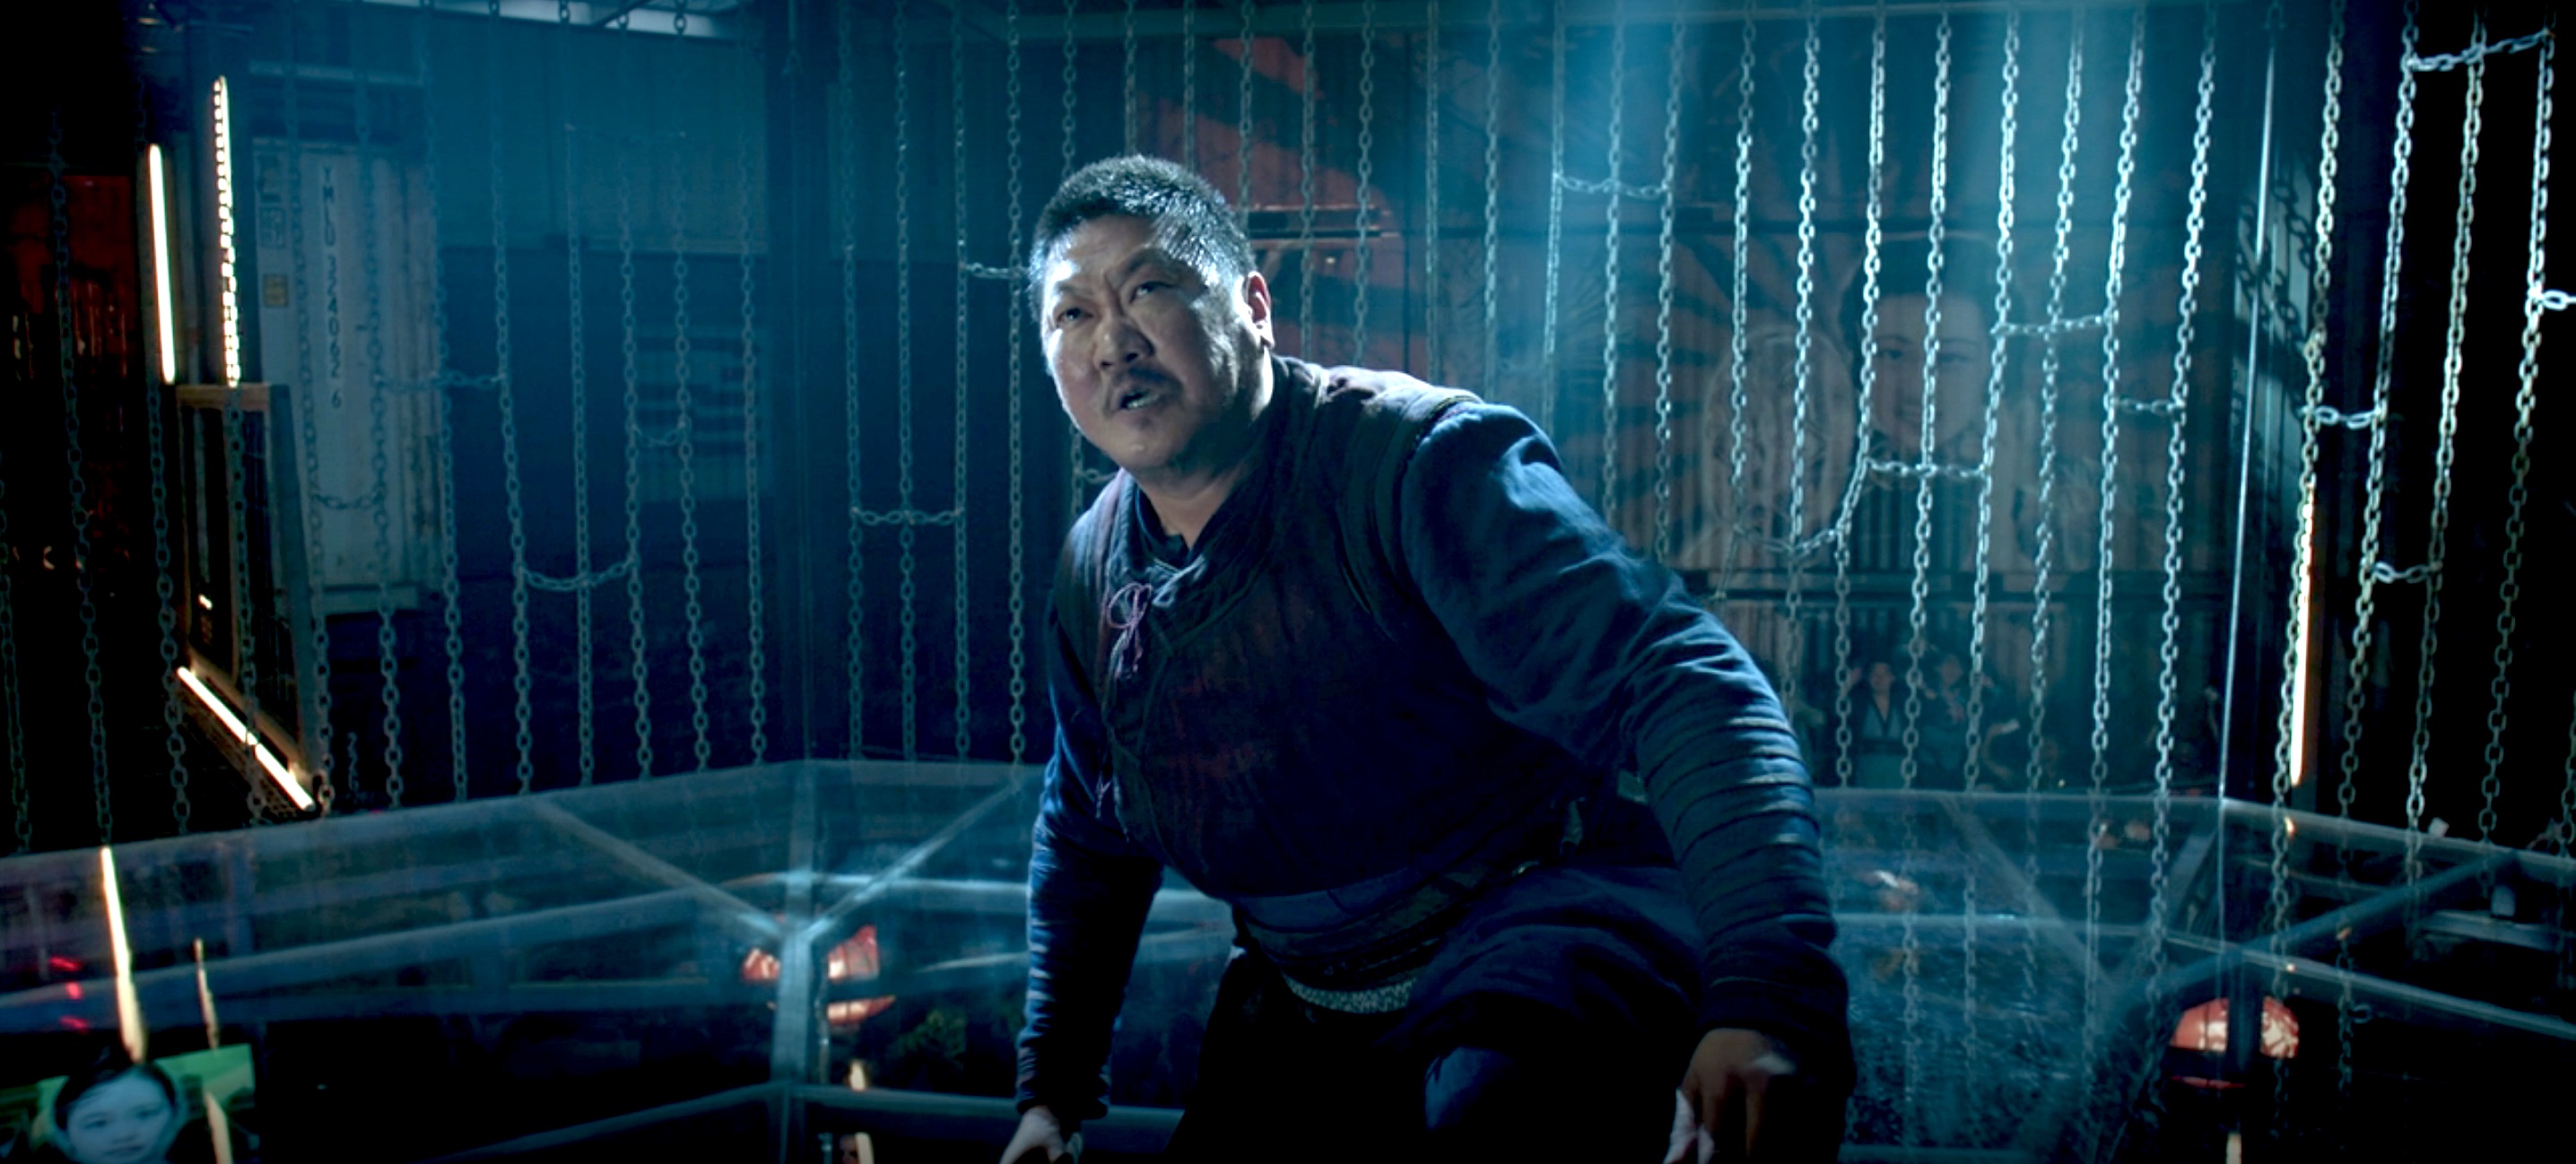 Shang-Chi and the Legend of the Ten Rings Cast - Benedict Wong as Wong